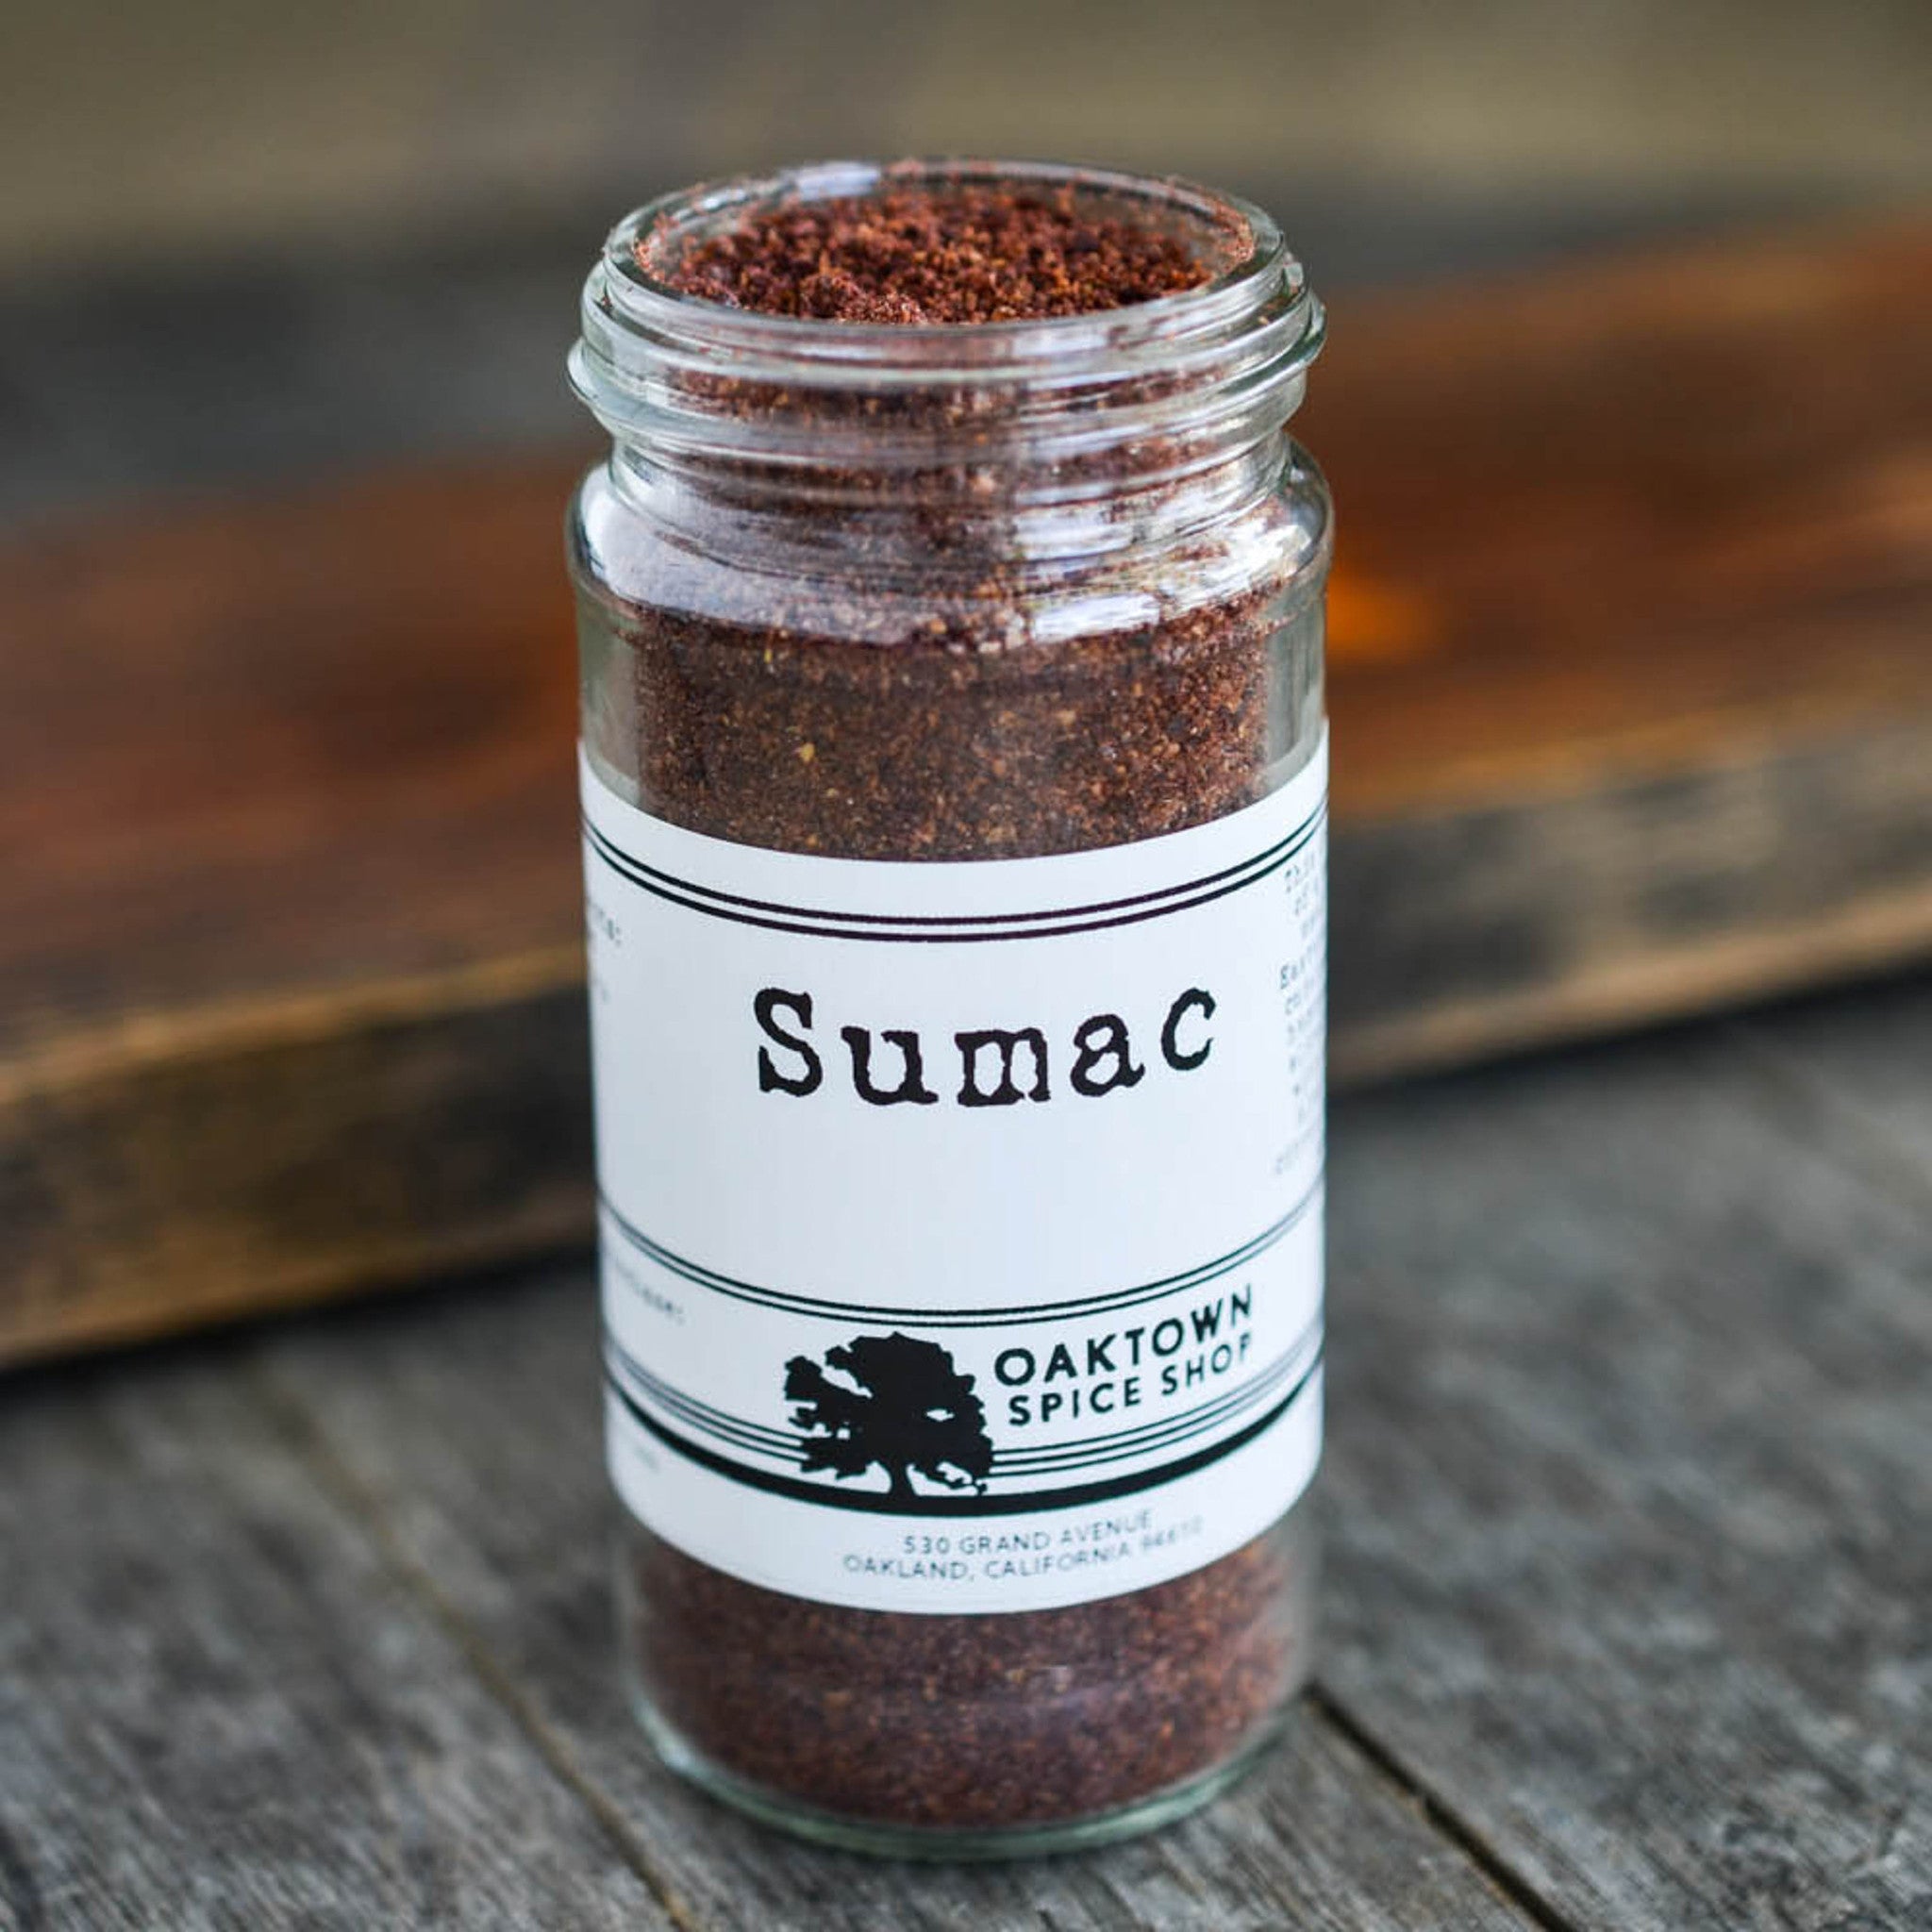 Sumac, Cured Turkish Jar, 1/2 Cup, 2.5 oz. by The Spice House